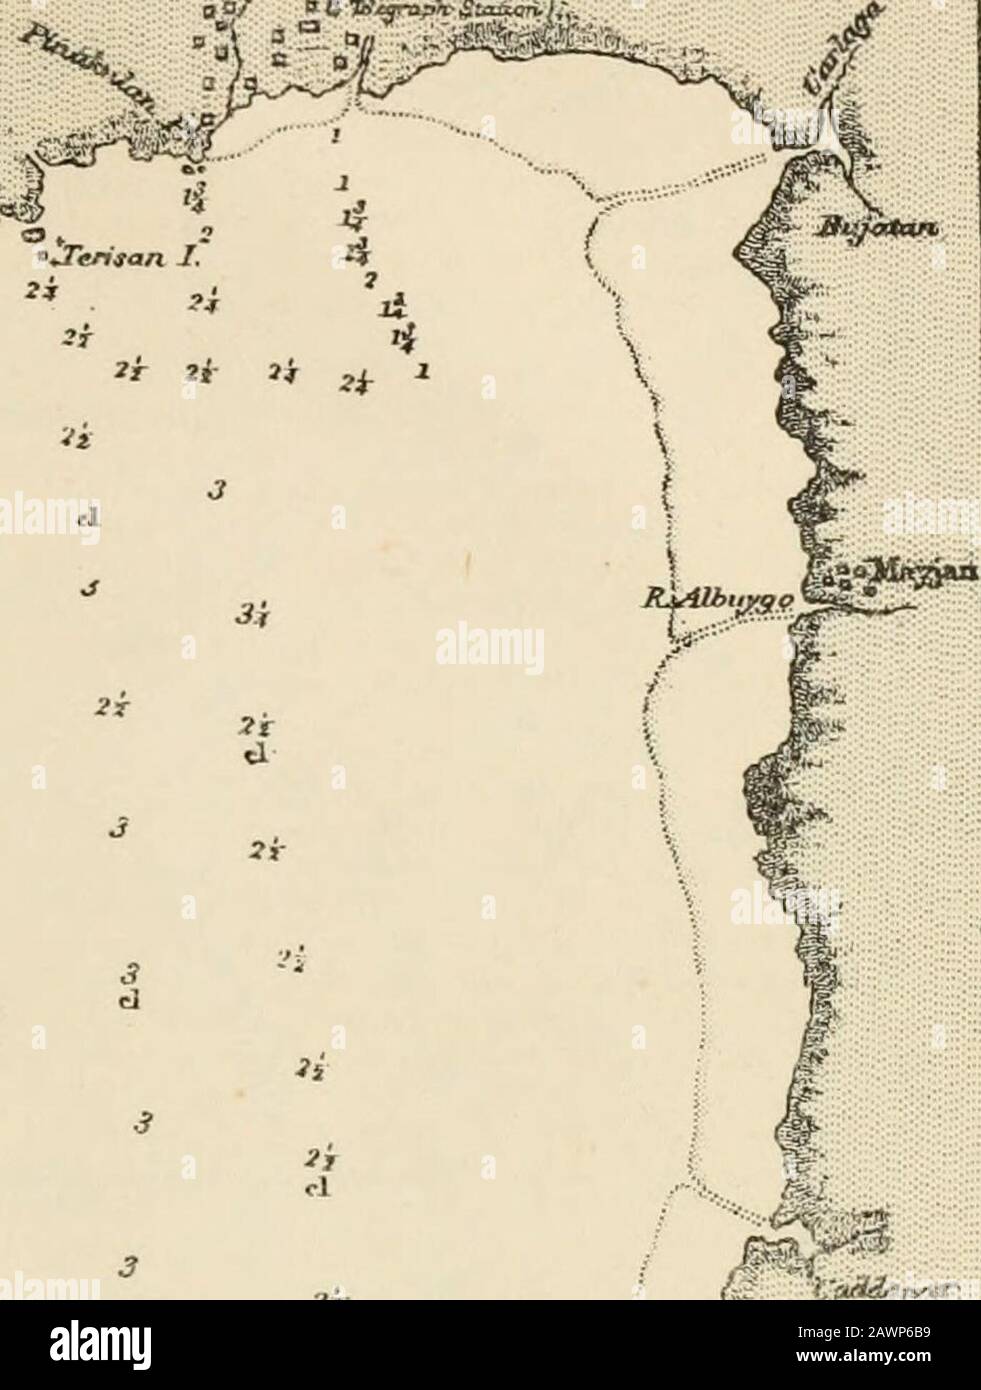 A pronouncing gazetteer and geographical dictionary of the Philippine Islands, United States of America with maps, charts and illustrations . .: hamlet on extreme SE.projection of SAmar, 9 m. SE. of Guiuan. S0R6x (.soh-rohn), ver.; mountain in S. BiliranI., off NW. coa.st Leyte, 4 m. NE. of Biliran. SOROXGOX (soh-rohng-ohn), ver.; S. point ofentrance to bay on E. coast of S^mar, 1 m. NE.of San Julian. SOROSIJIBAHAX (saw - raw - seem - bah - hahn),nat.; mountain in NW. Leyte. SOROT (soh-roht). nat.; hamlet in E. S^mar, 2 m.SW. of Borongan. SORSOGON, LUZON, PROVINCE OF- (Sor-soh-gohn, ver.) Capi Stock Photo